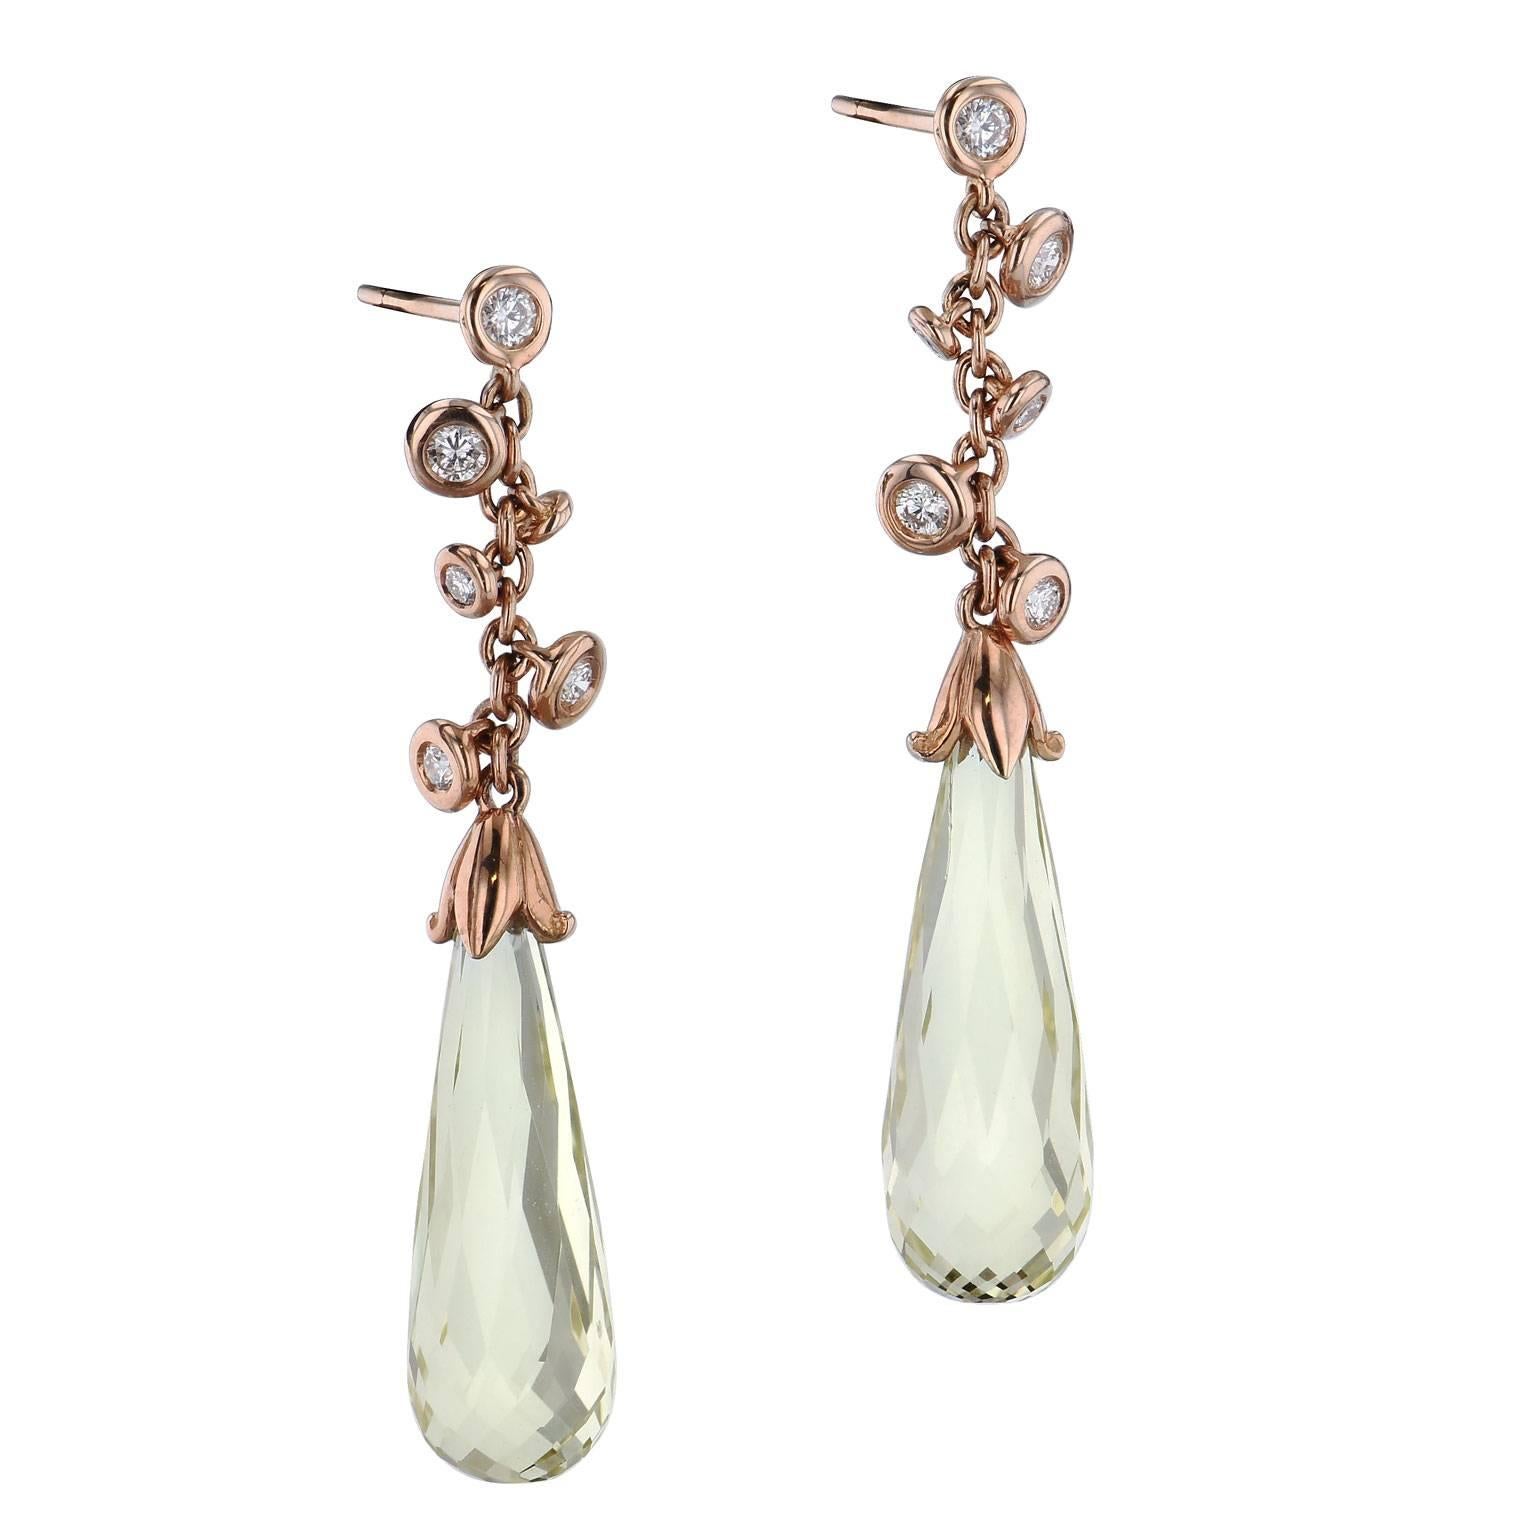 Lemon Quartz Briolette and Diamond Dangle Earrings in 18 karat Rose Gold

These darling earrings are one of a kind and handmade by H&H Jewels.  

They feature two briolette lemon quartz that radiate with celestial beauty as 0.50 carat of diamond